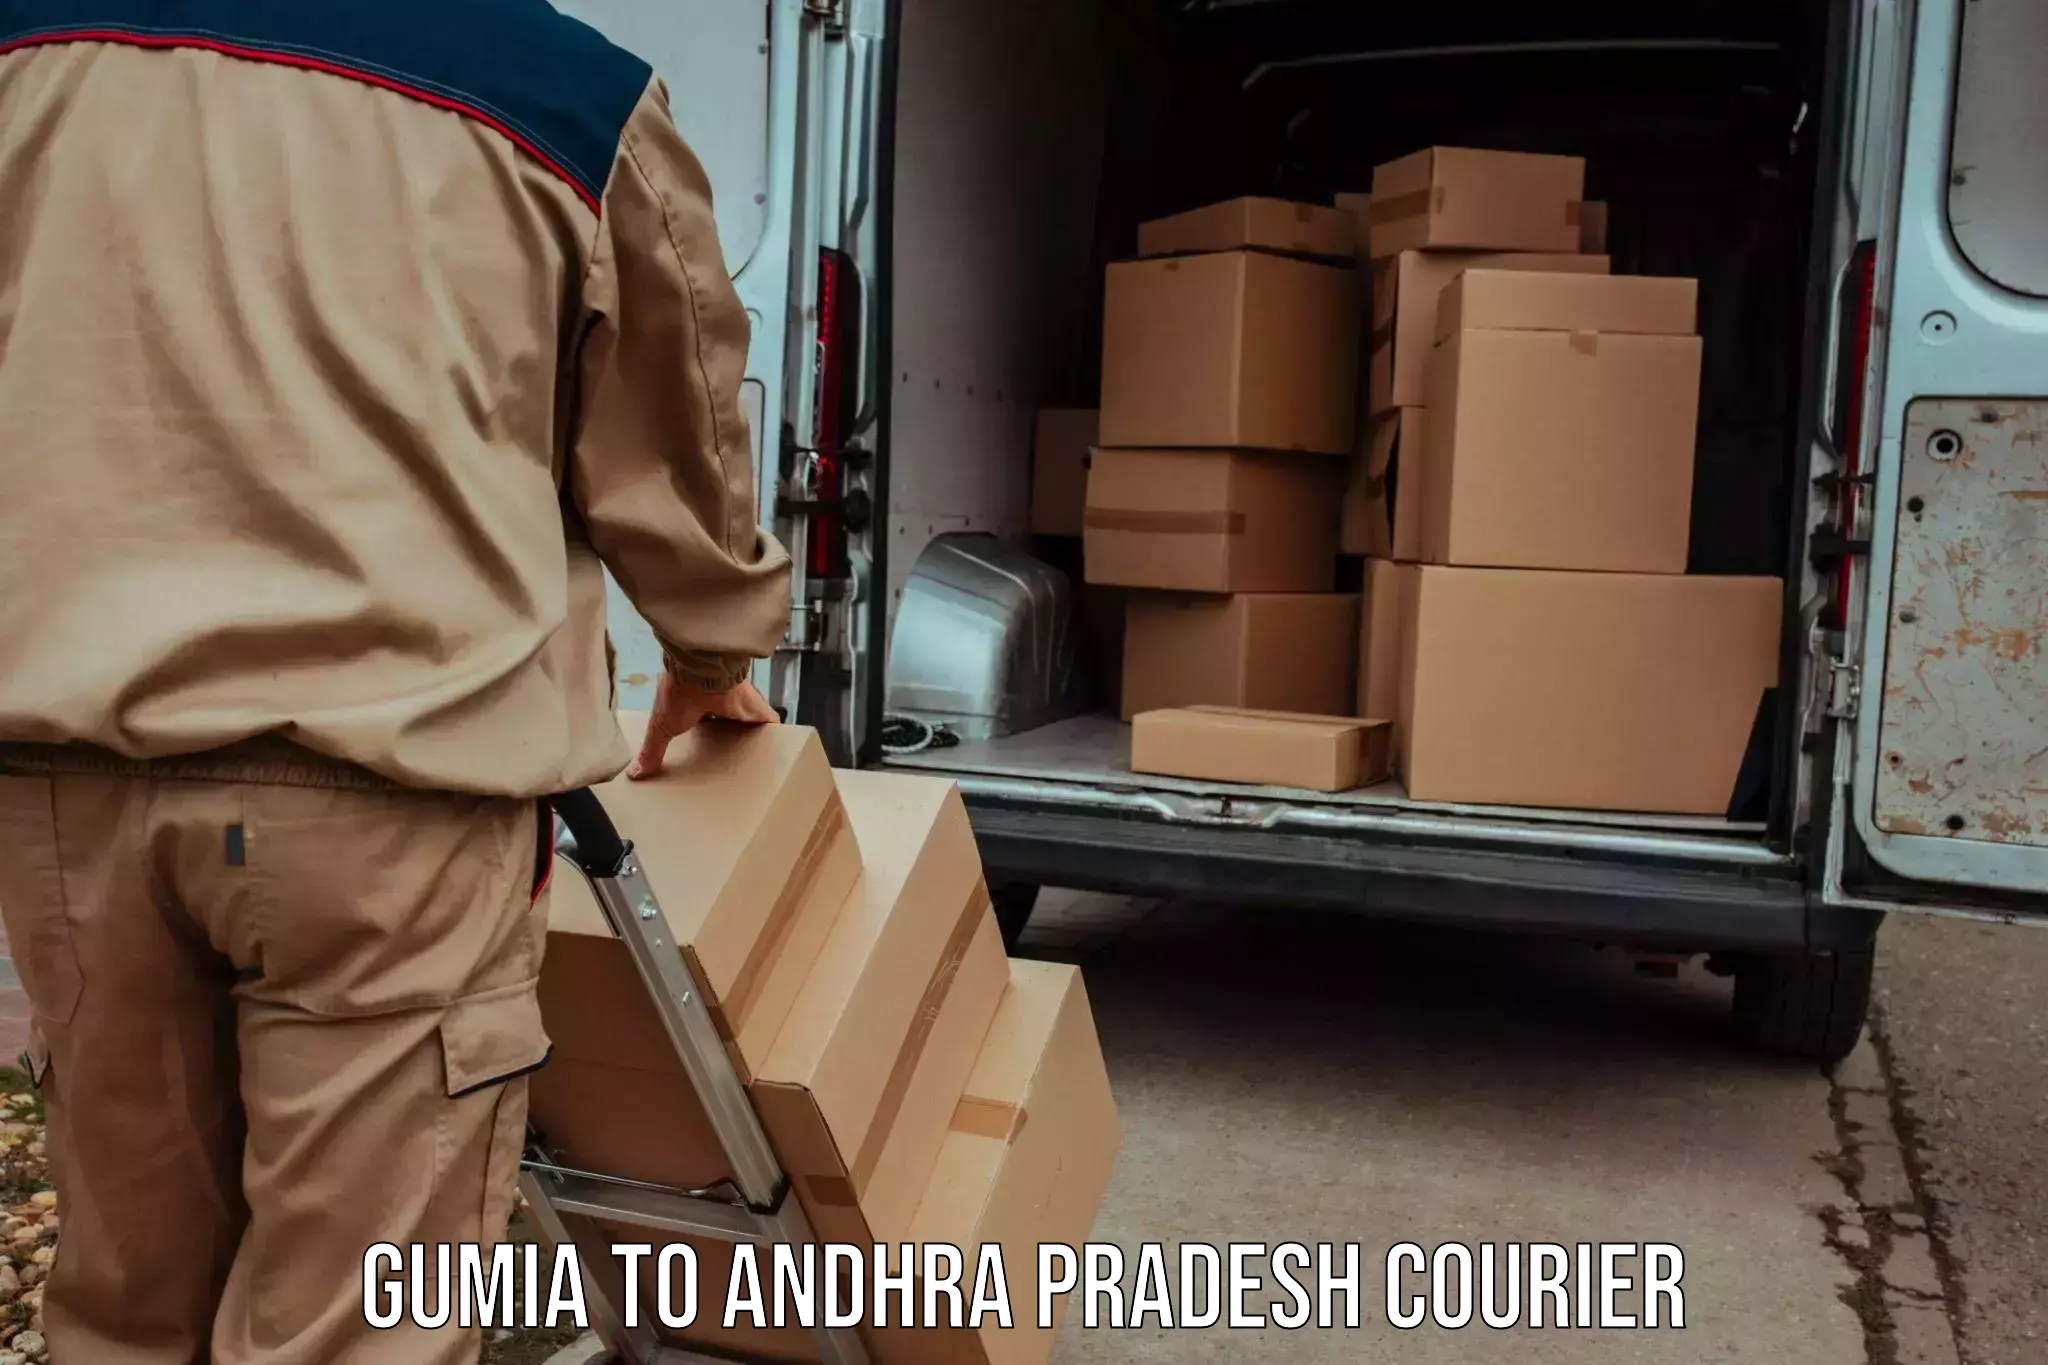 Residential courier service Gumia to Machilipatnam